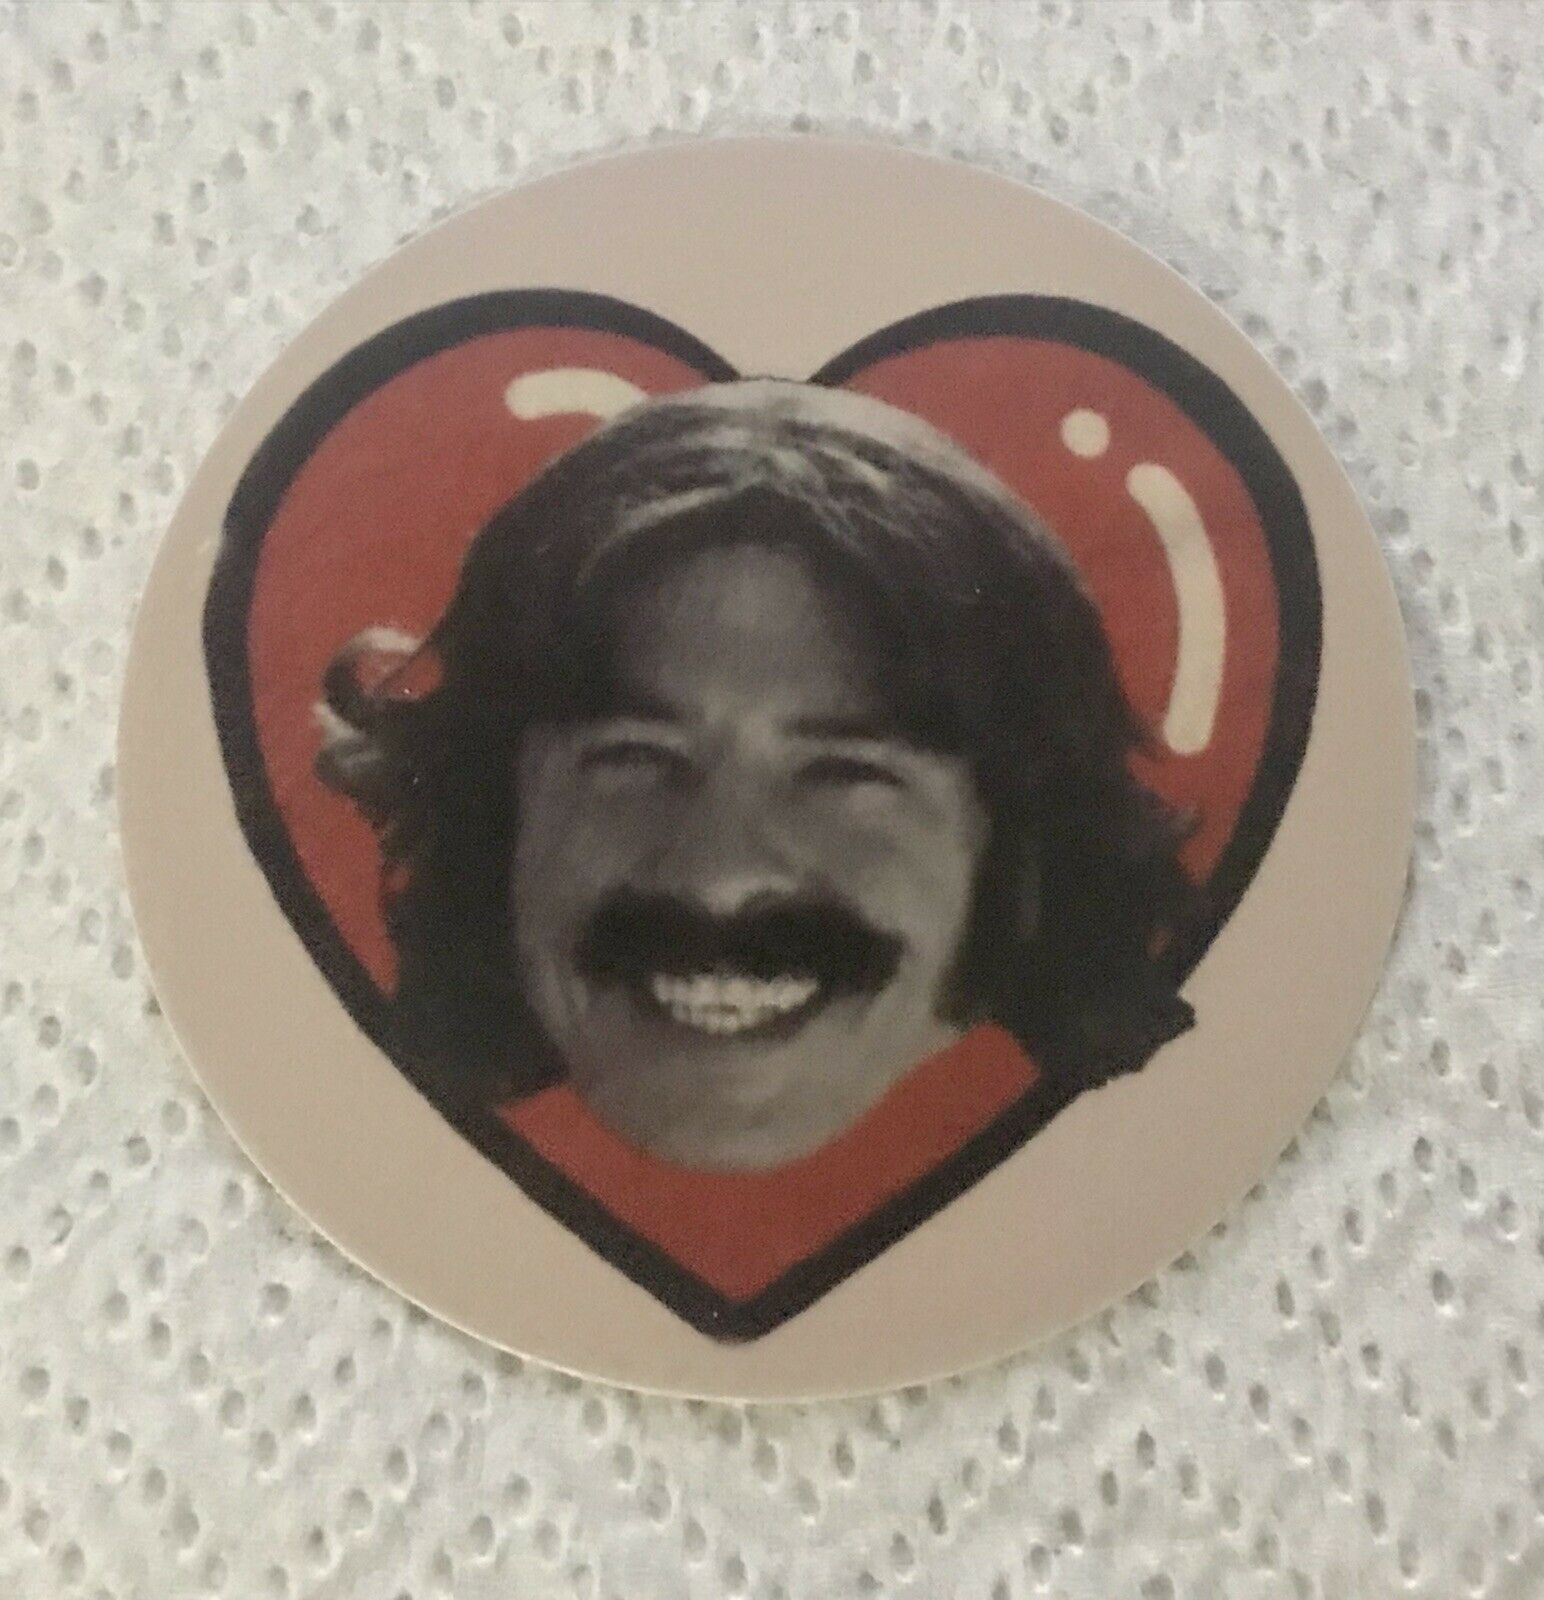 I ❤️ Davy Grolton (dave Grohl) Round Vinyl Decal/sticker Foo Fighters🔥nirvana